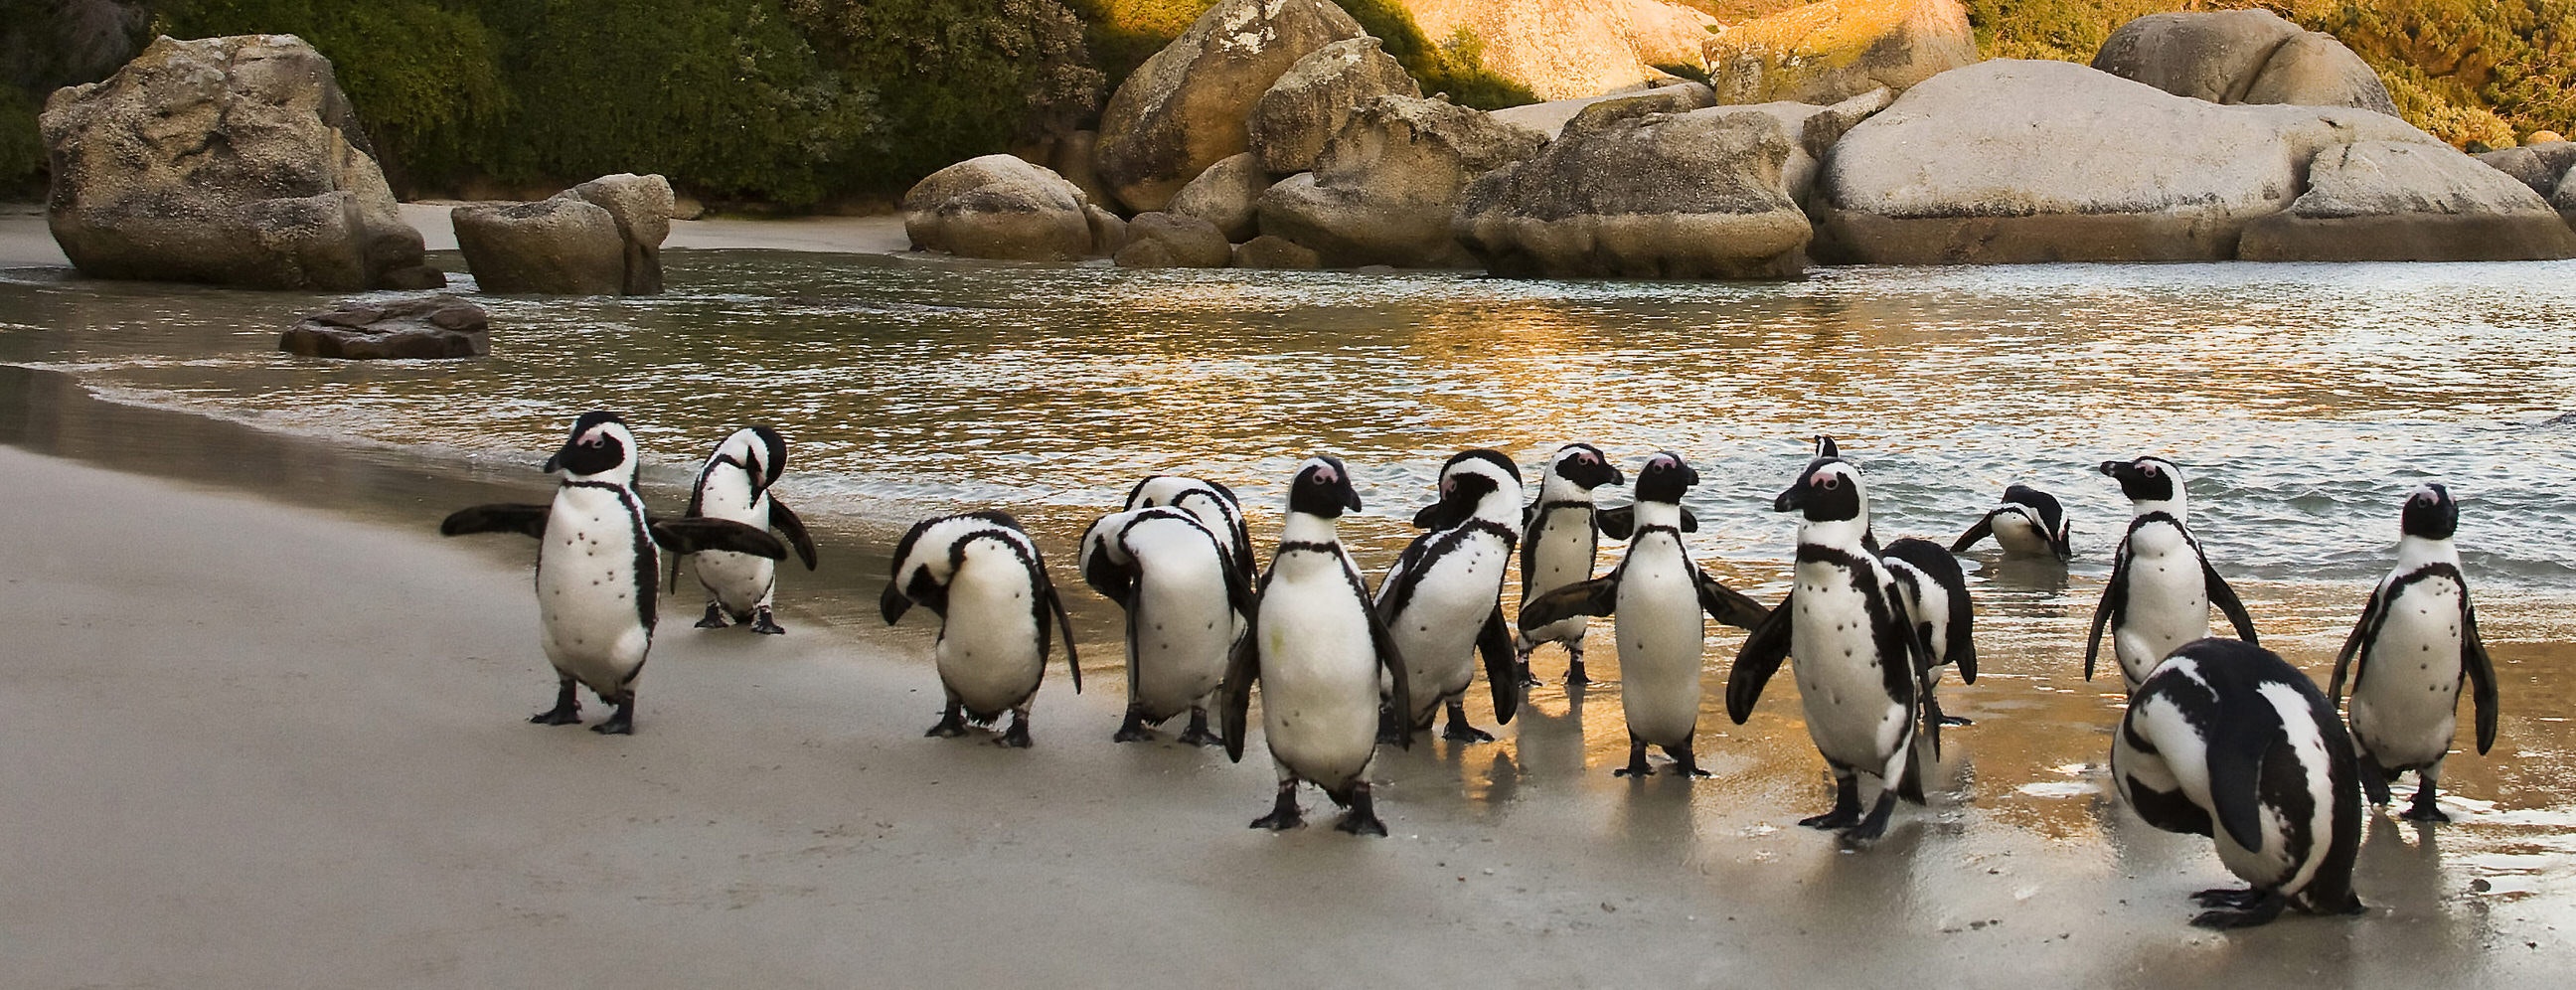 A group of penguins stand close together on the beach, with large rocks in the background.